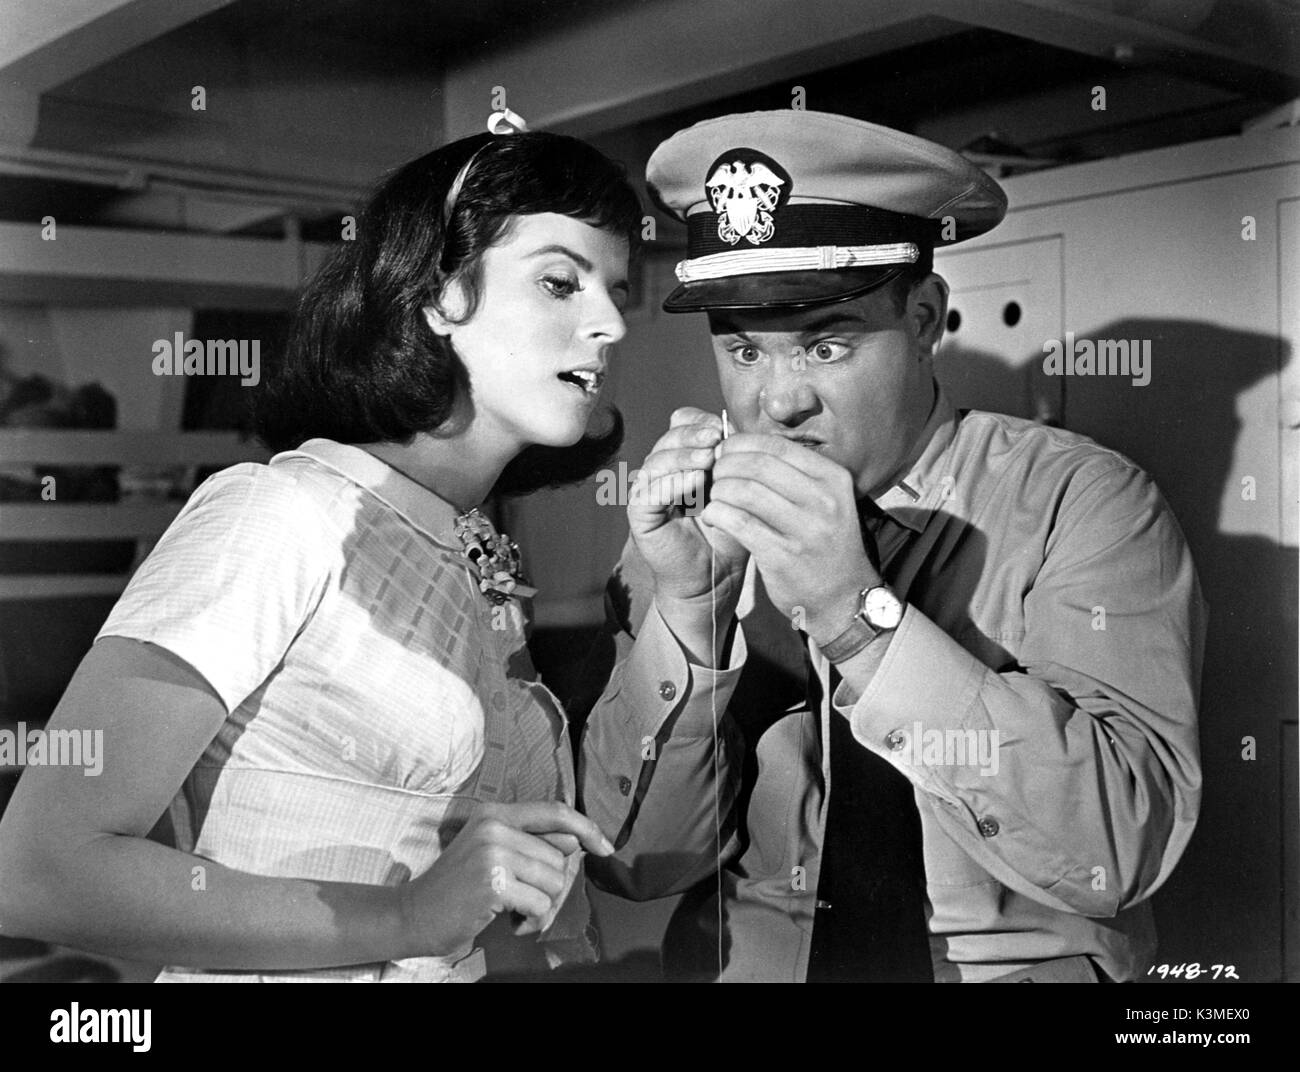 MCHALE'S NAVY [US] 1964 CLAUDINE LONGET, TIM CONWAY Date : 1964 Banque D'Images